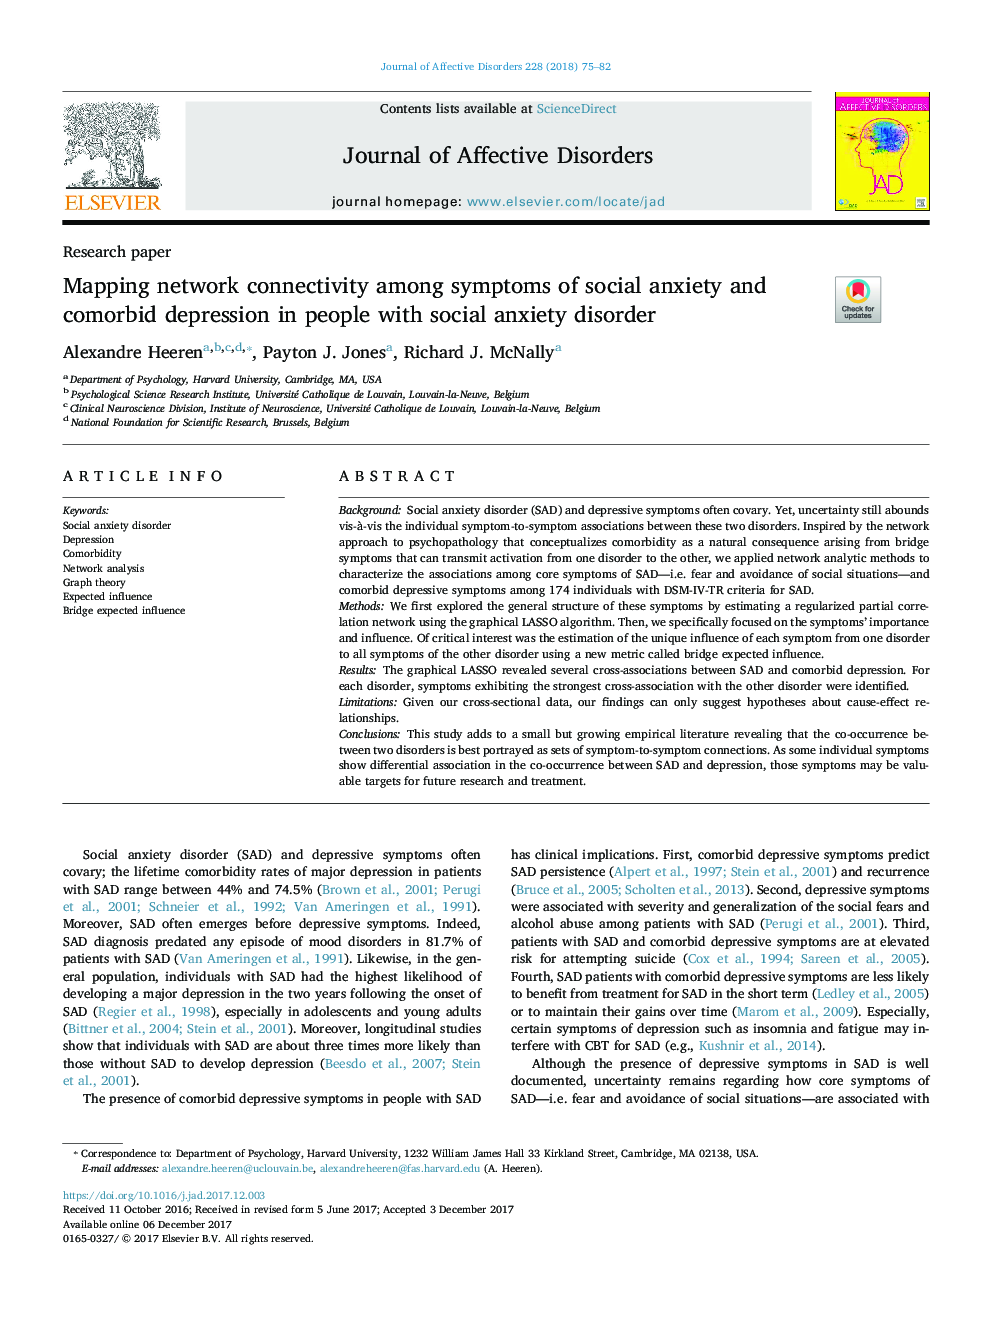 Mapping network connectivity among symptoms of social anxiety and comorbid depression in people with social anxiety disorder